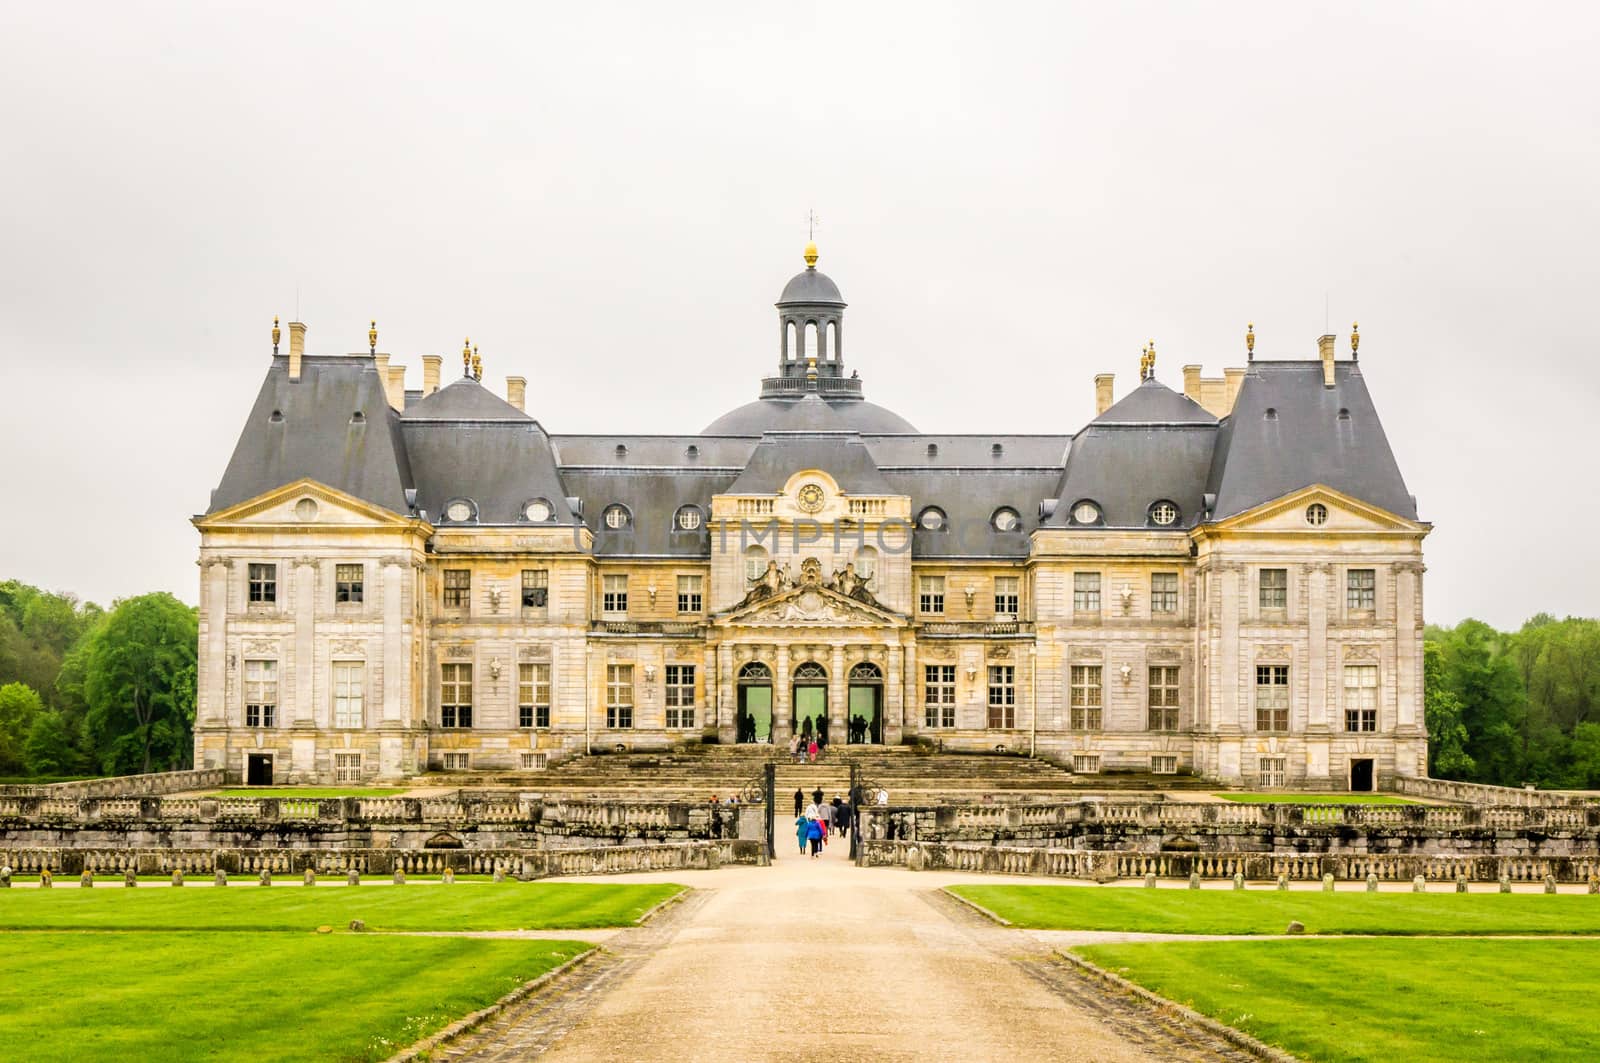 Vaux-le-vicomte castle in France and its front facade